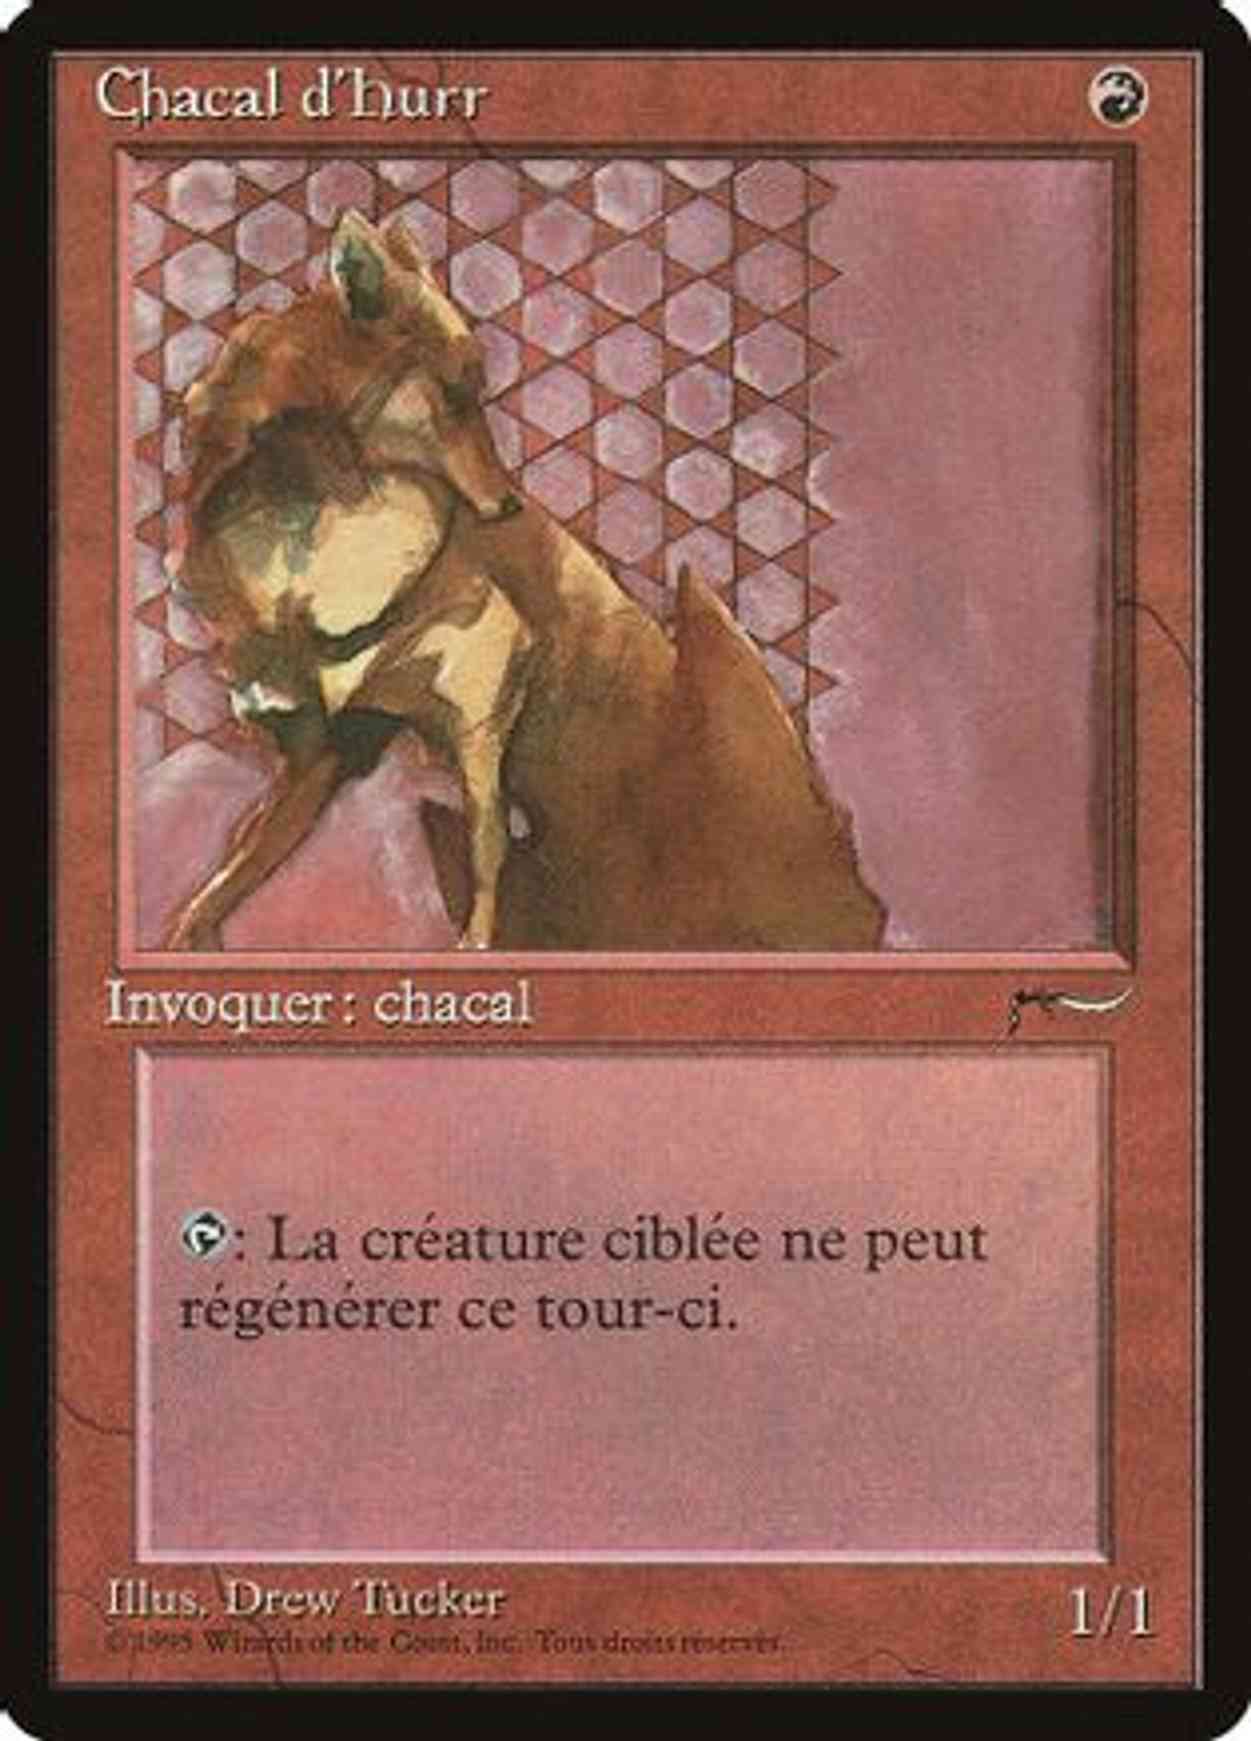 Hurr Jackal (French) - "Chacal d'Hurr" magic card front